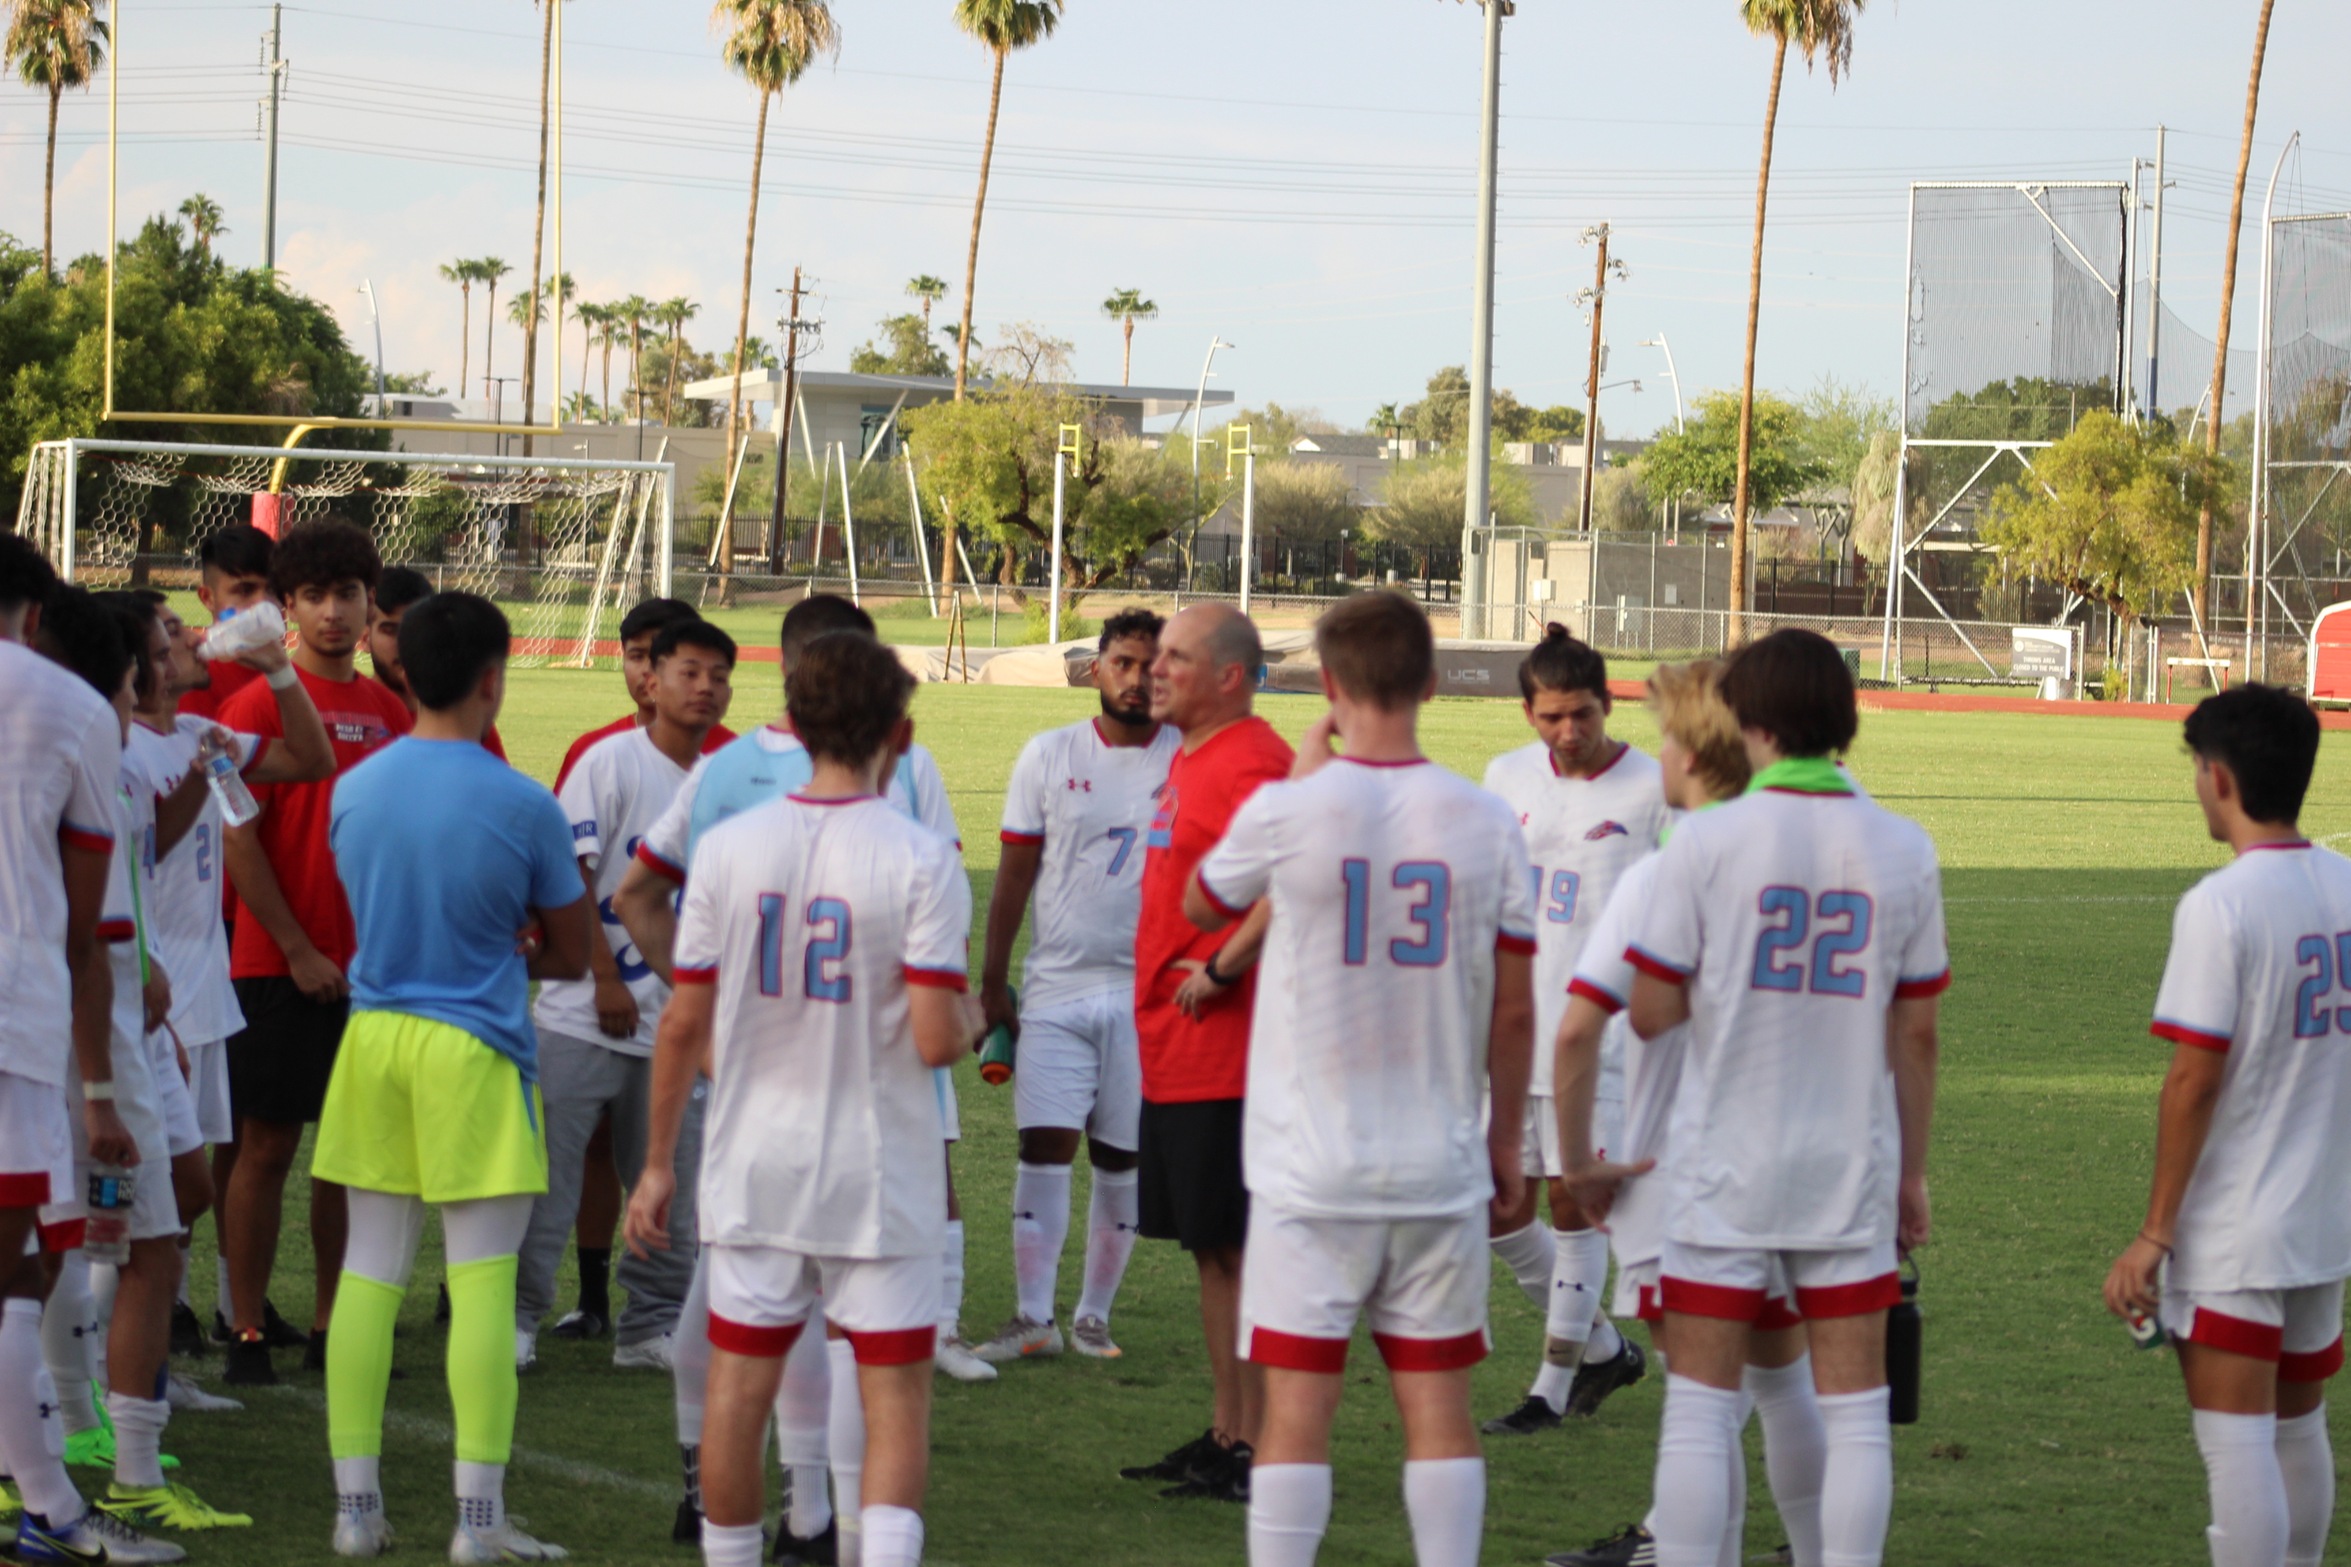 Mesa's magical season ends as they lose in overtime to Jones College, 2-1.